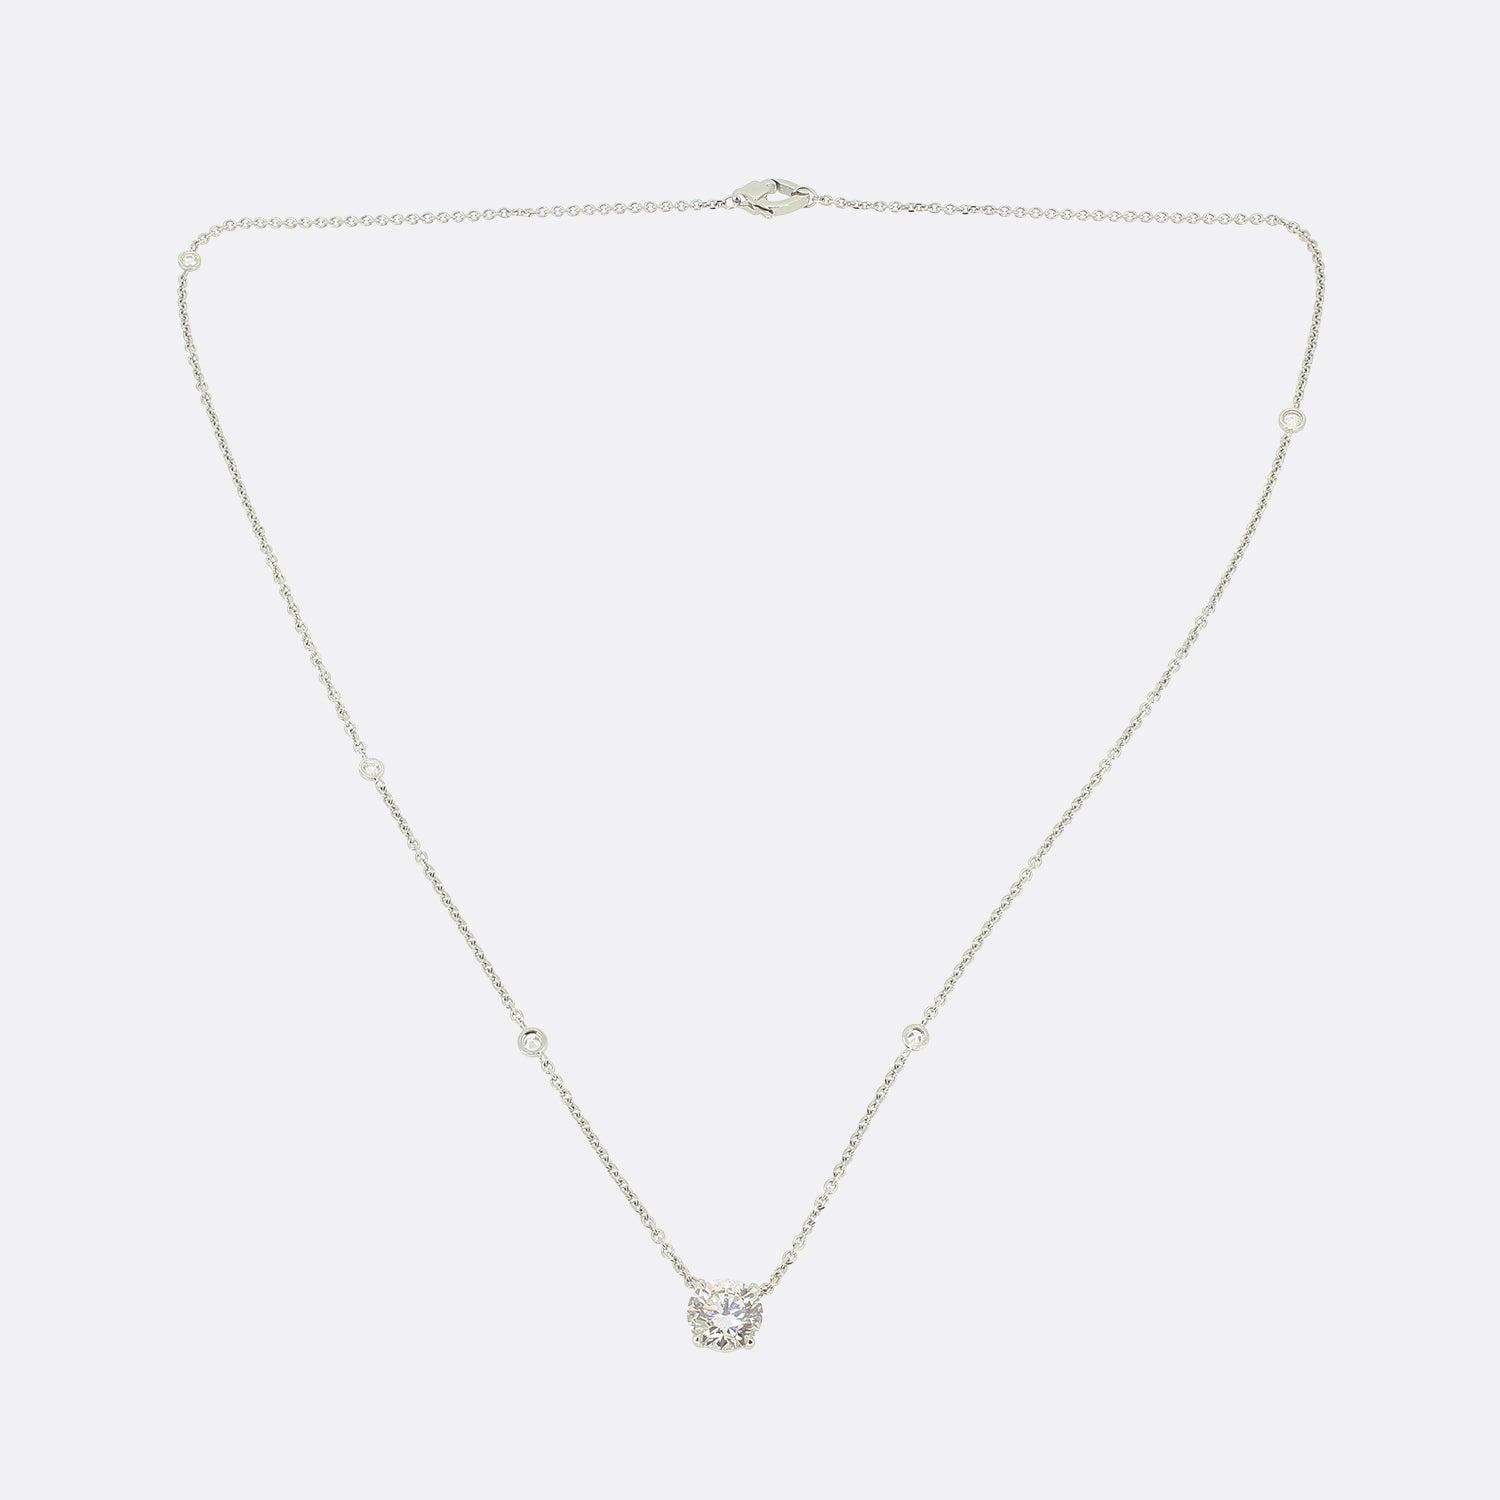 Boodles 1.70 Carat Diamond Necklace In Excellent Condition For Sale In London, GB